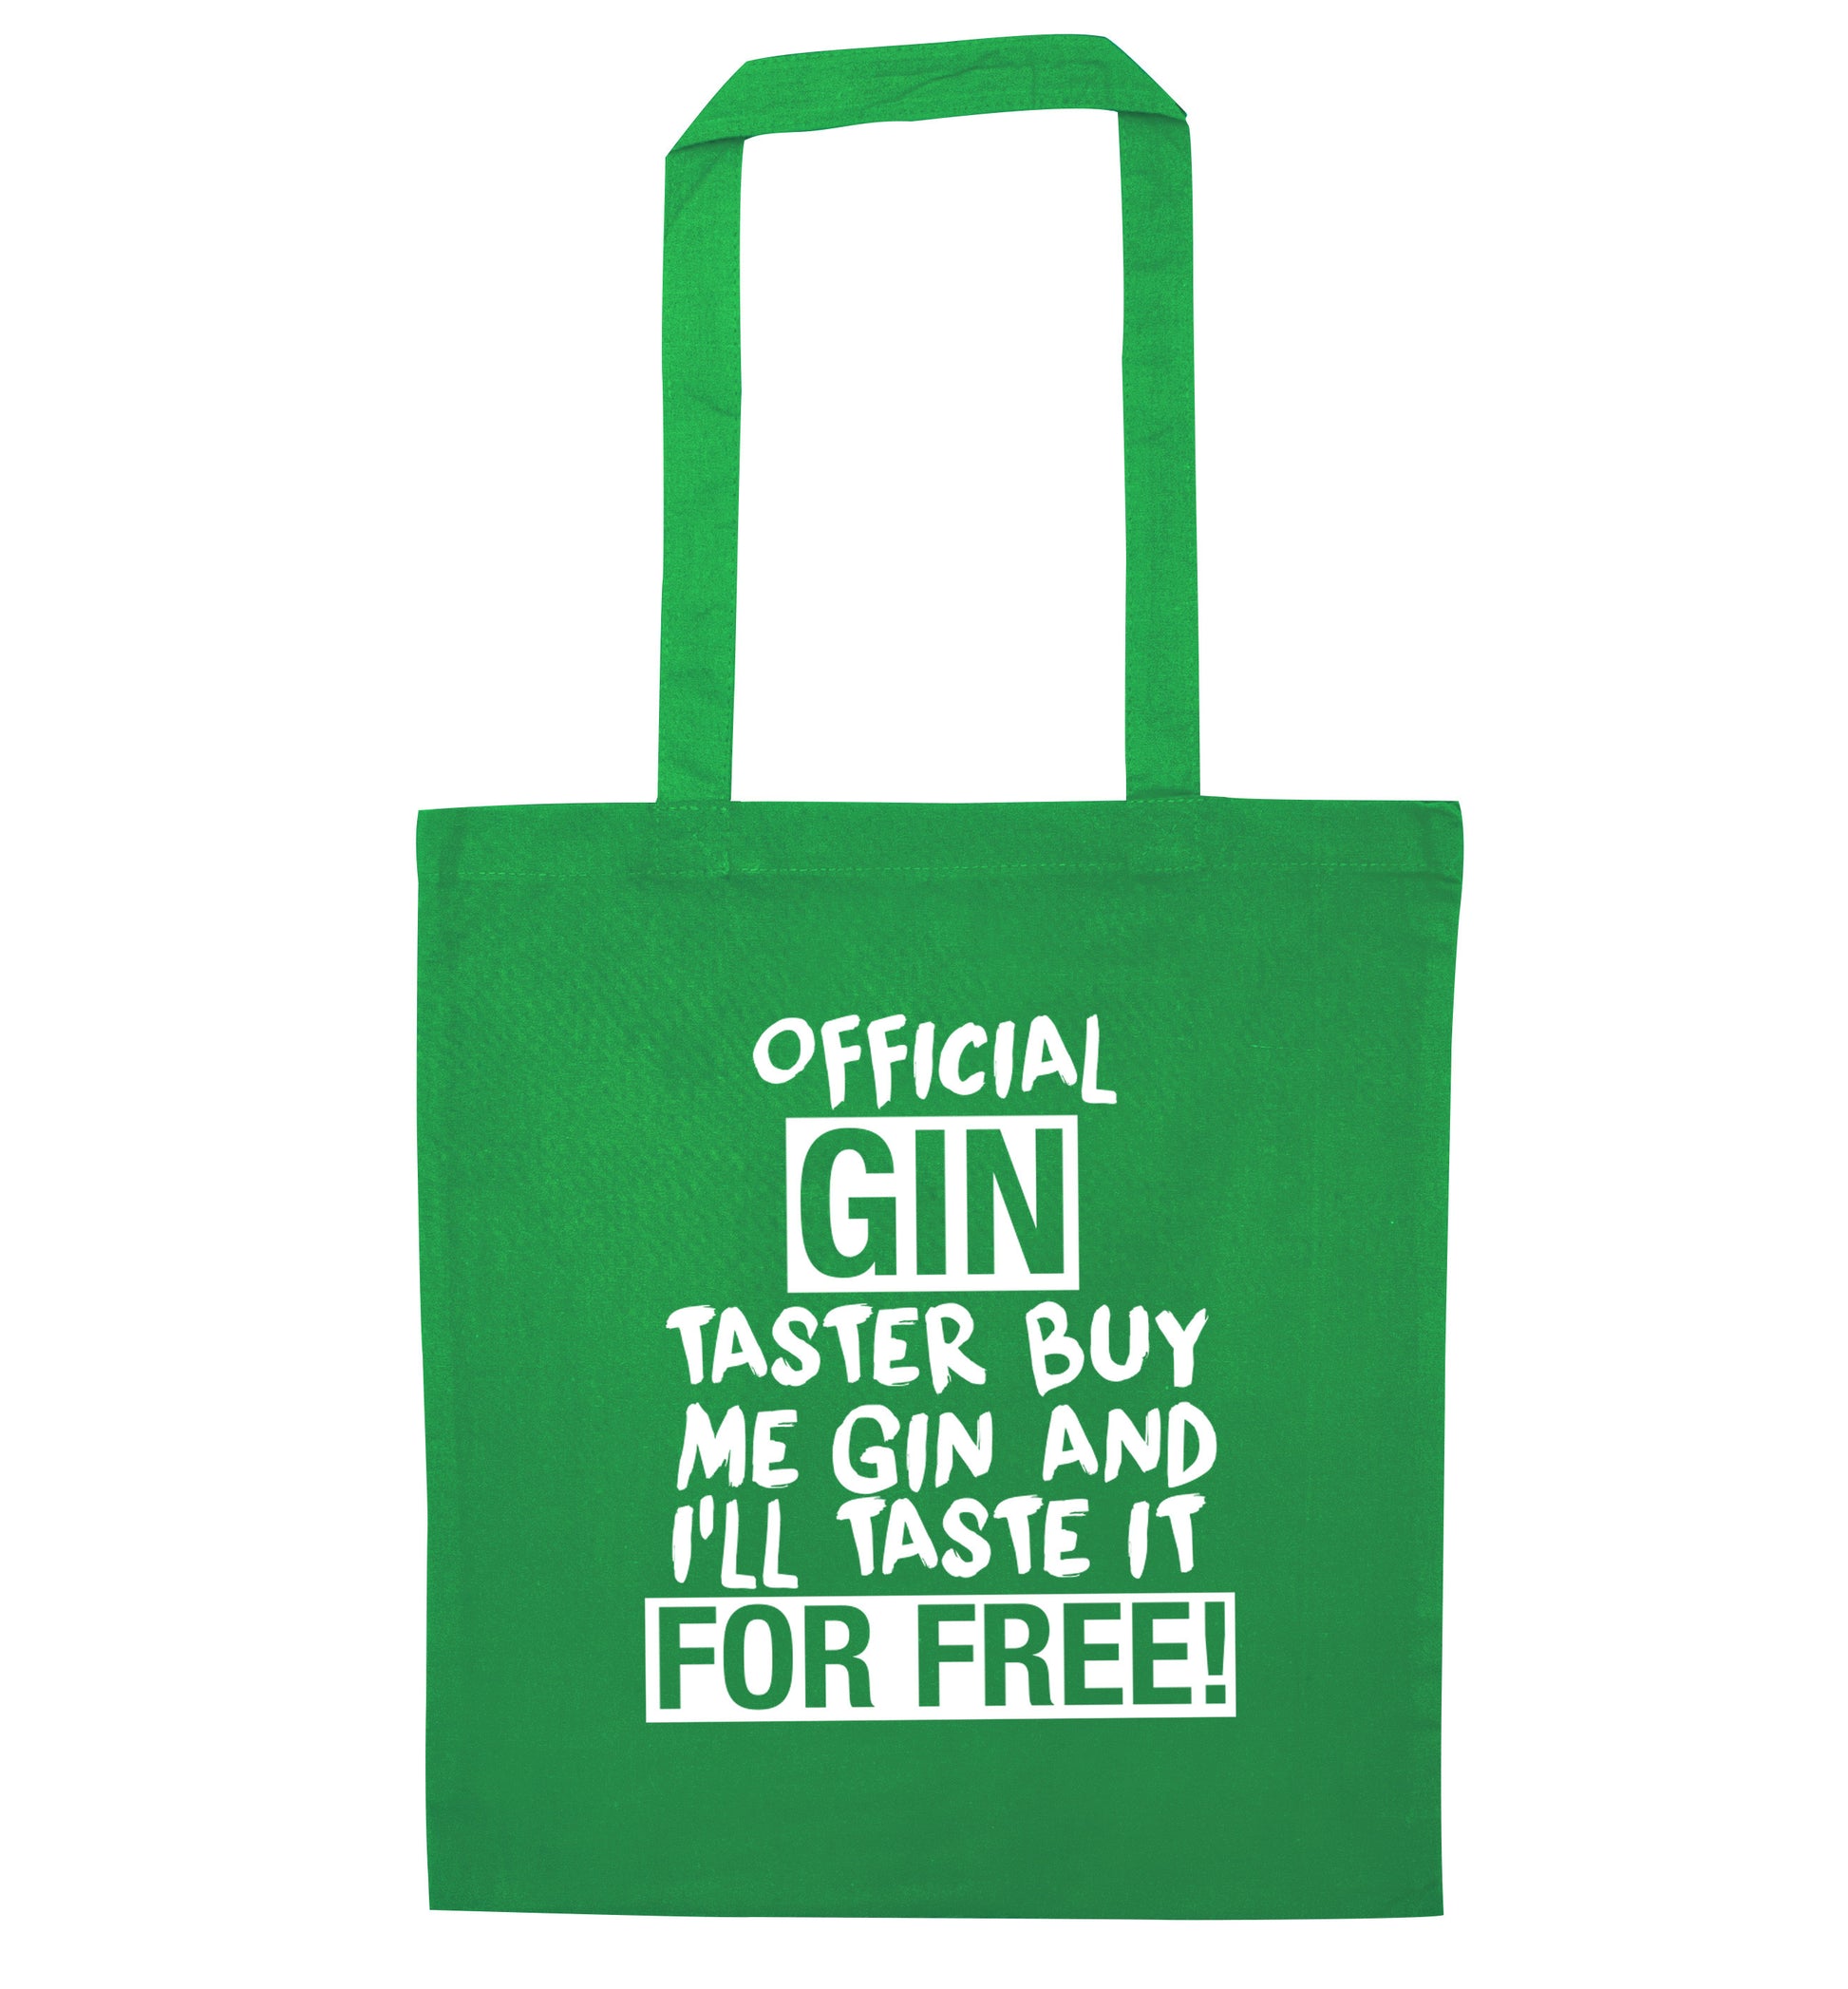 Official gin taster buy me gin and I'll taste it for free green tote bag